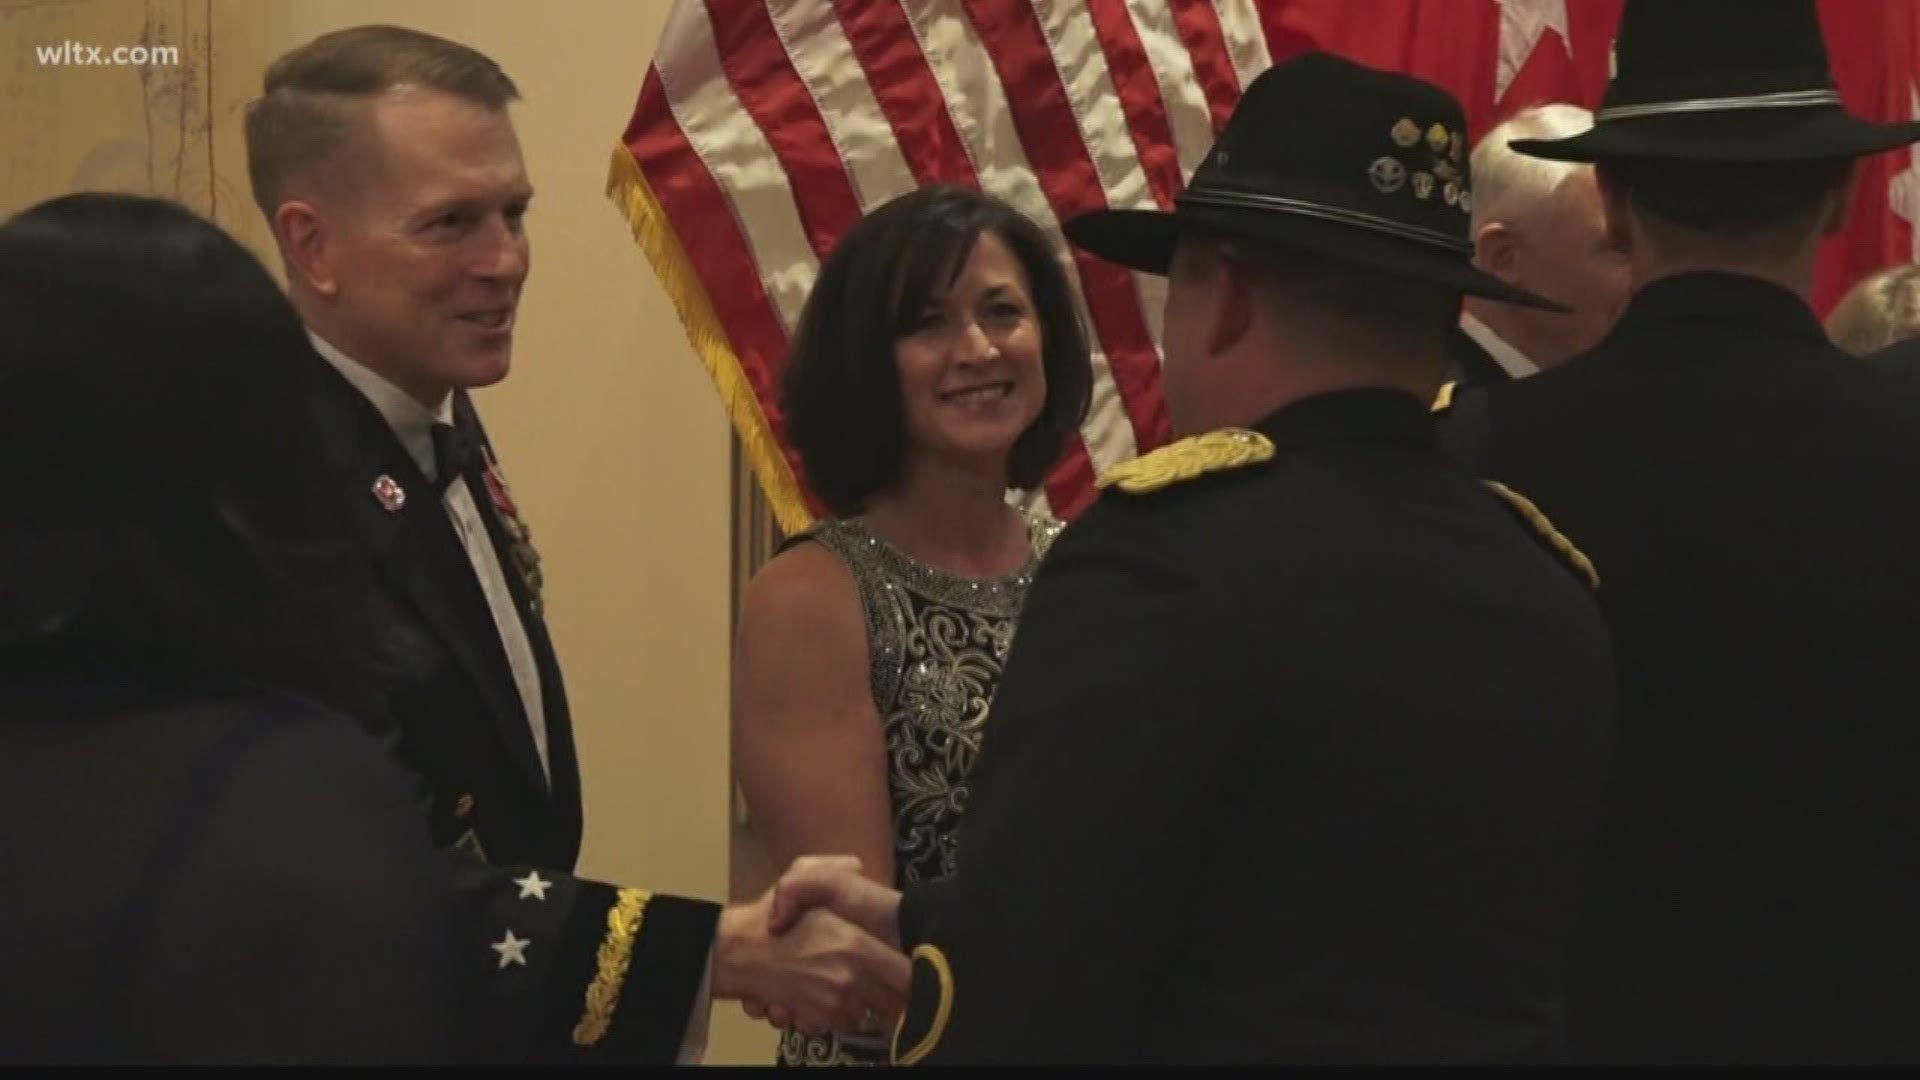 Hundreds of soldiers and their guests gathered at the Medallion conference center for the Third Army Centennial gala